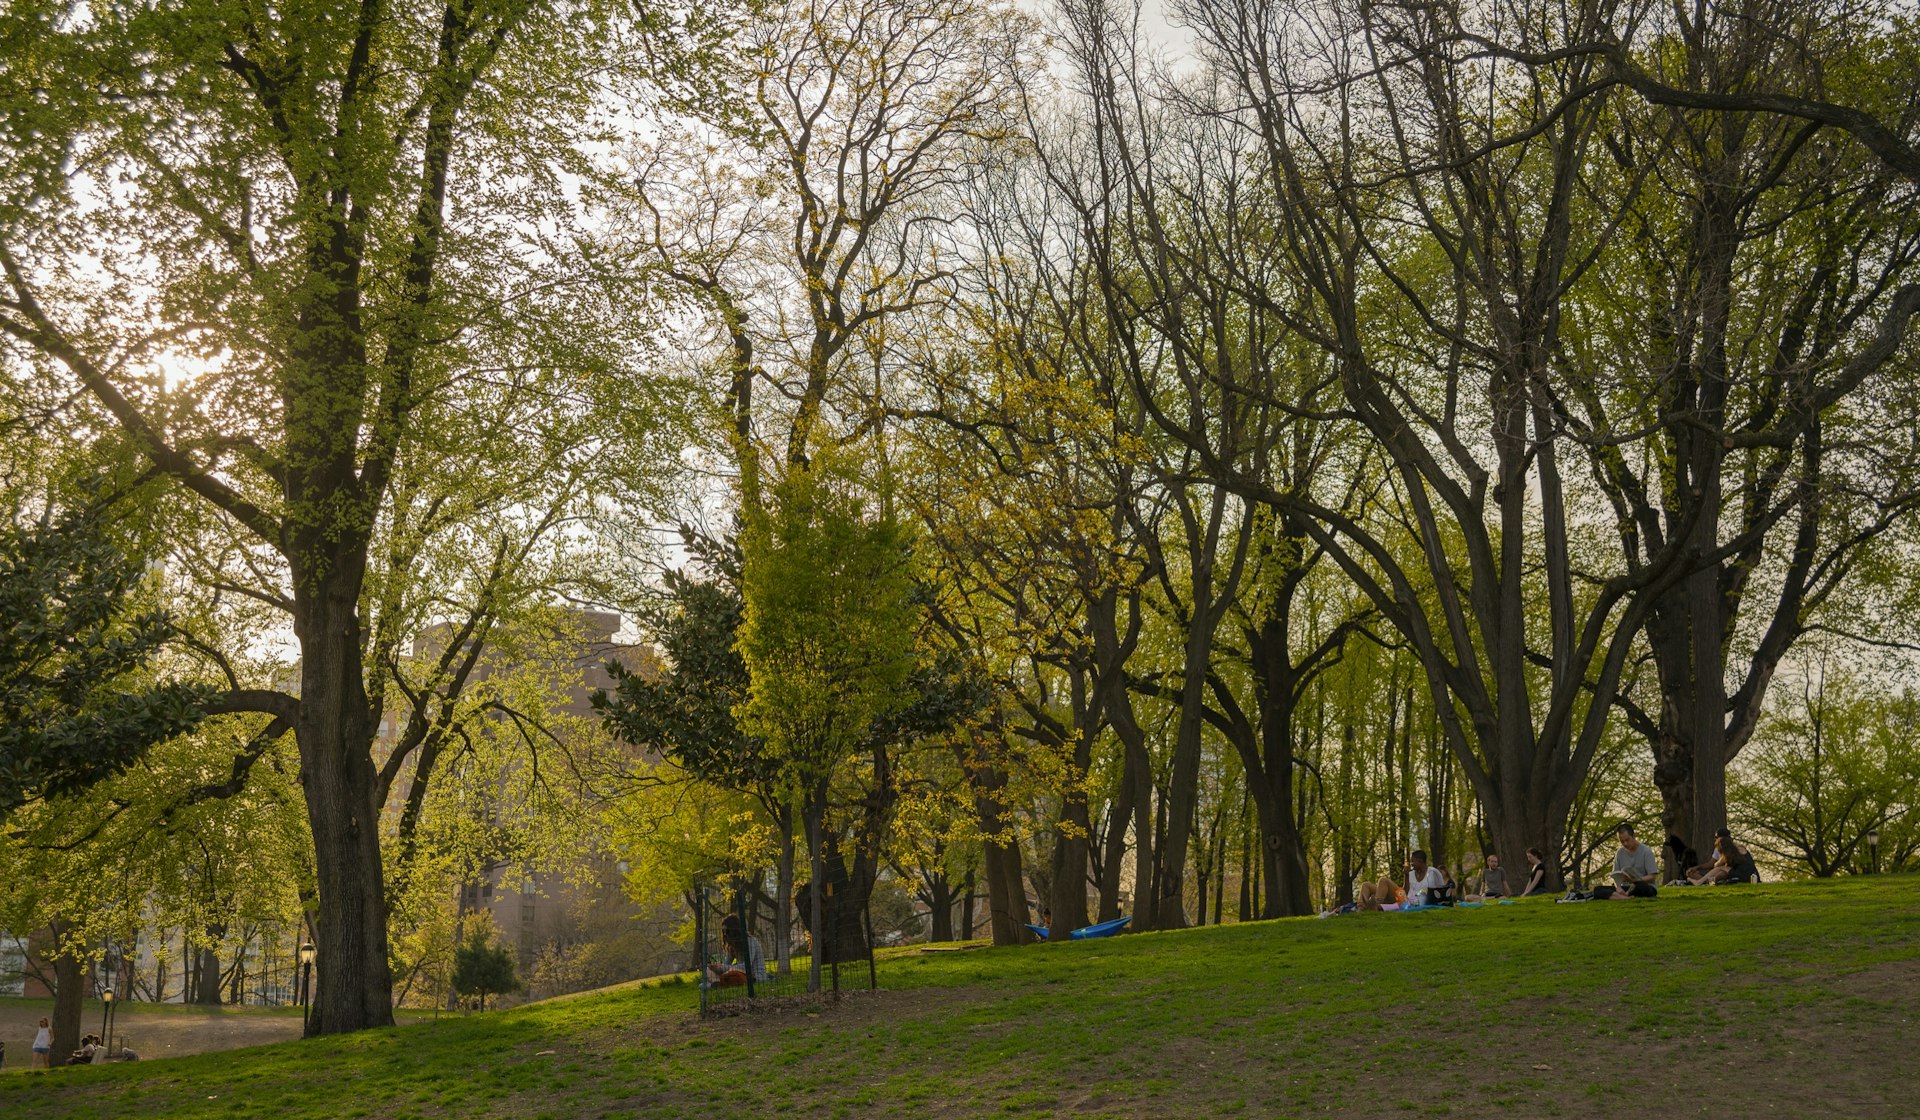 People rest on the grass under trees scattered throughout Fort Greene Park in Brooklyn, New York.